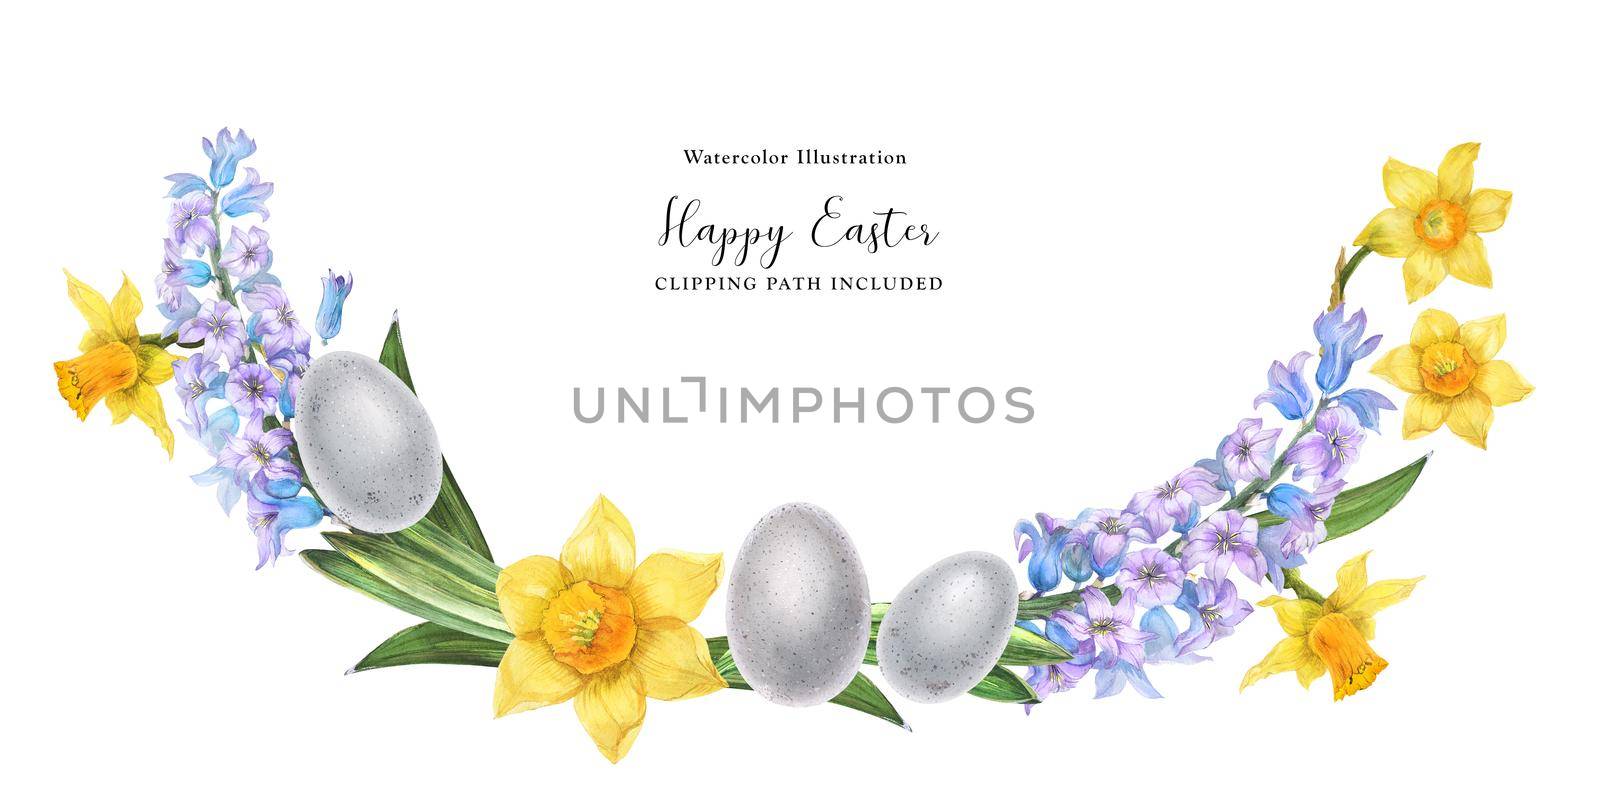 Hyachinths and daffodils and bird eggs watercolor arc on a white background for Easter, clipping path included